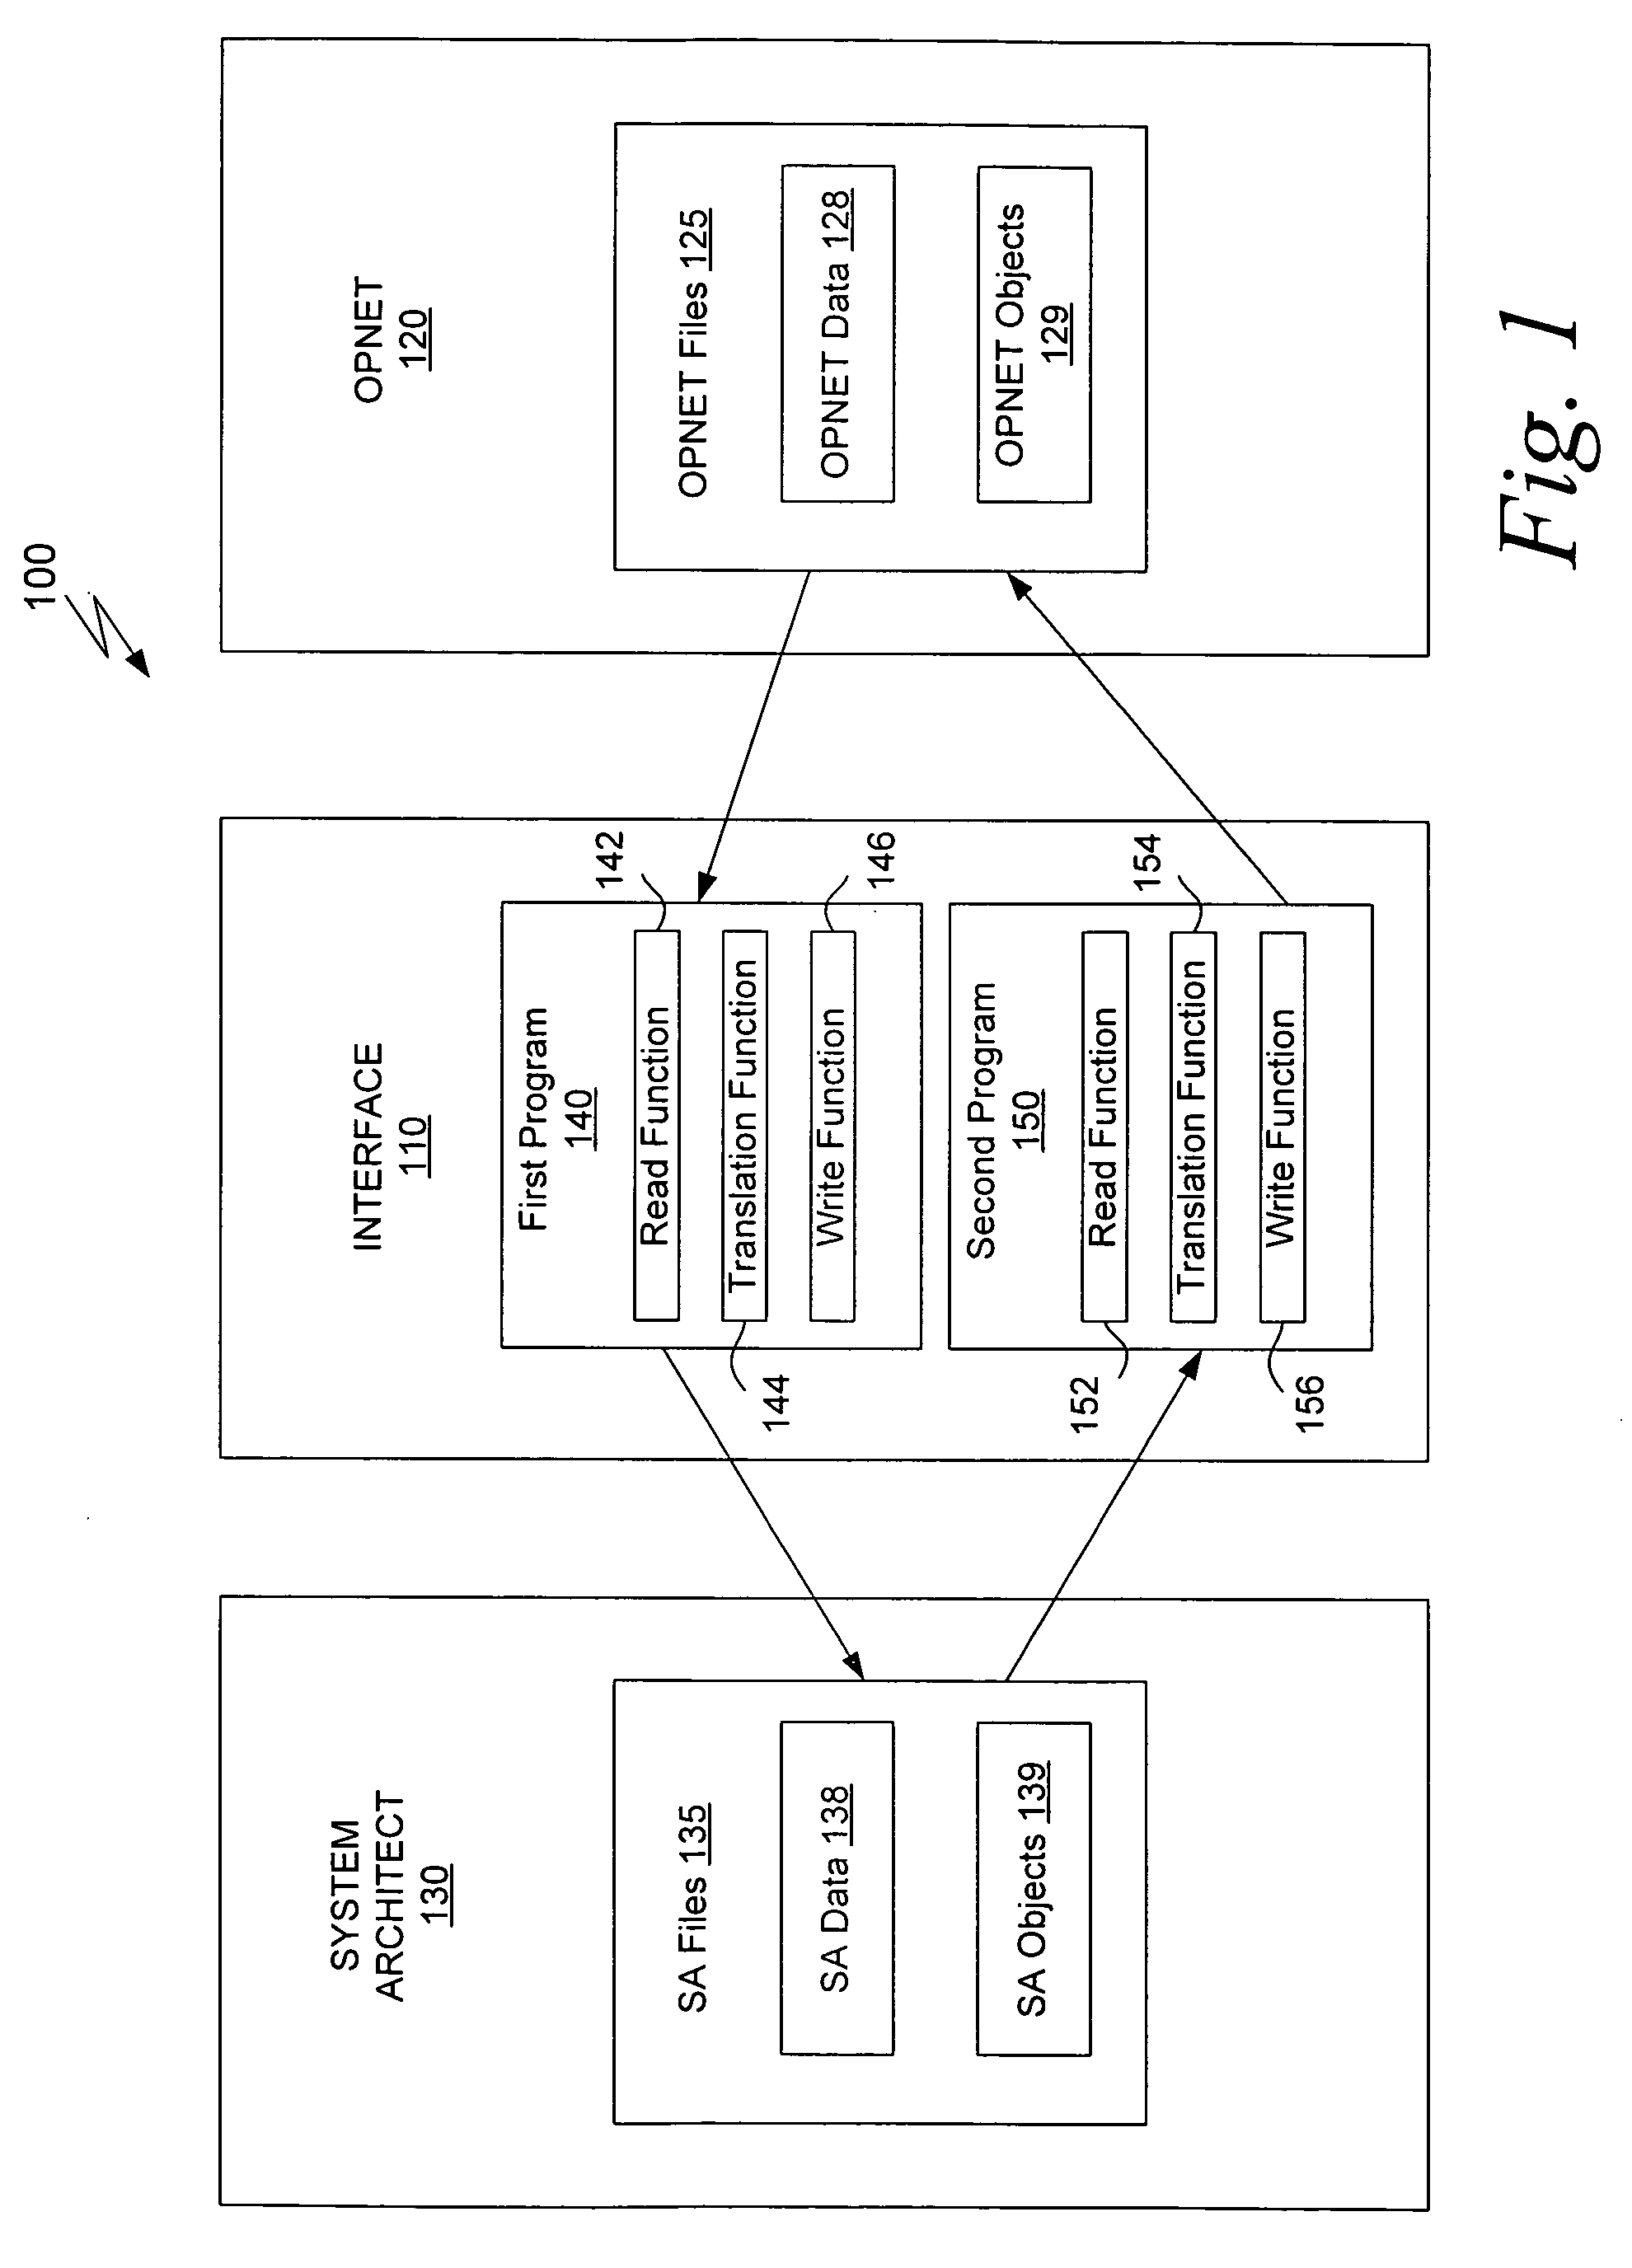 Method and apparatus for providing an interface between system architect and OPNET